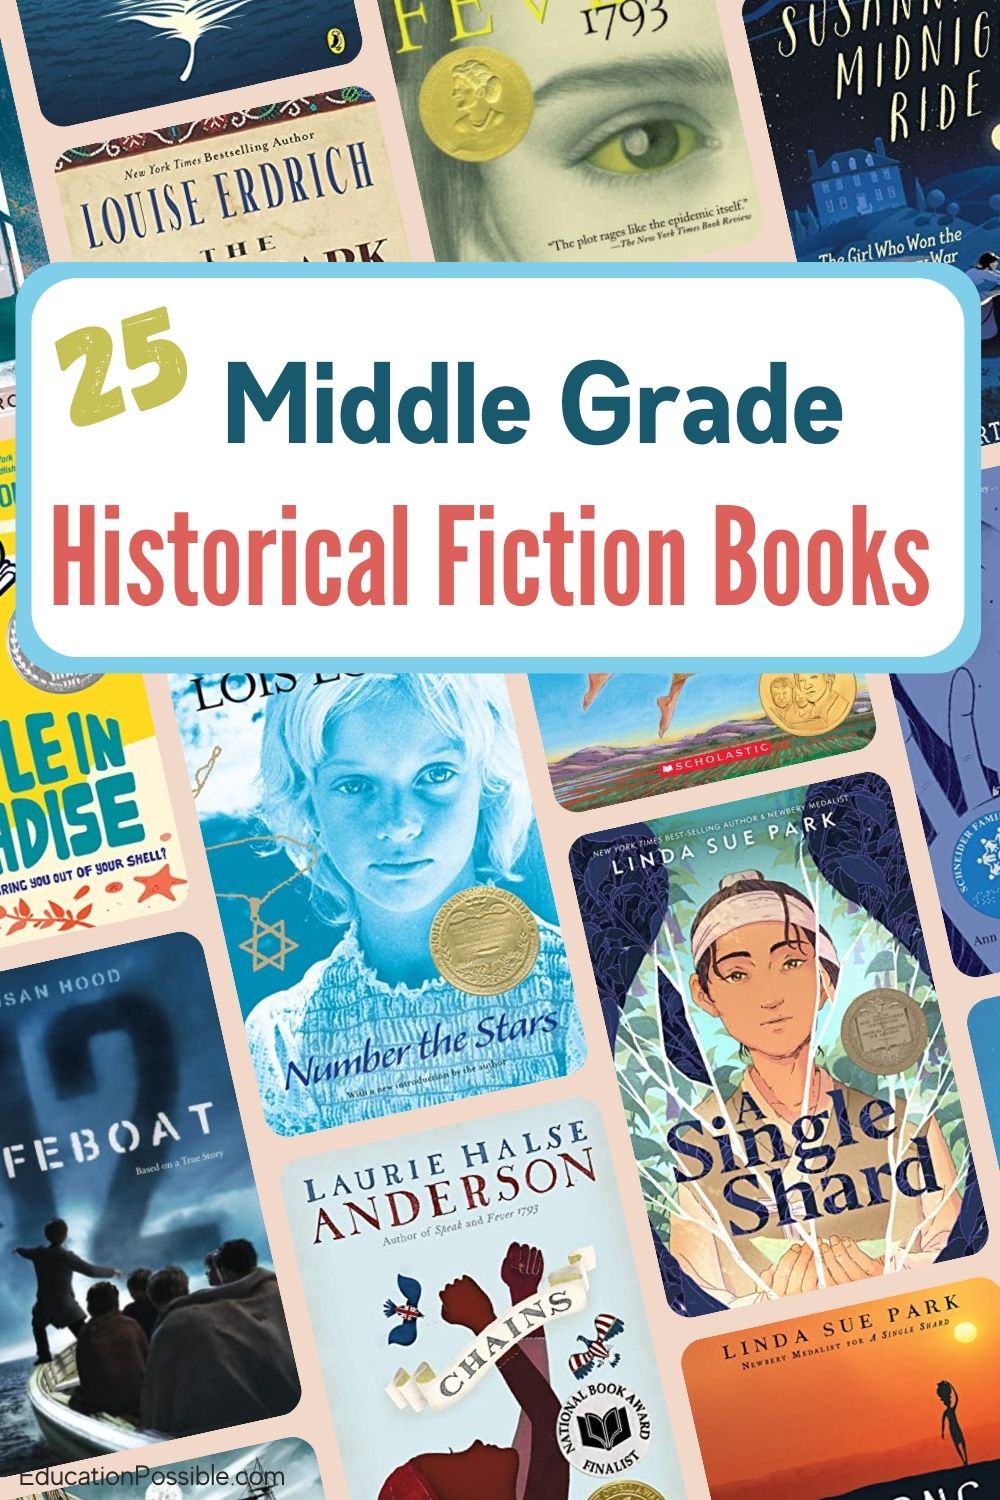 Collage of middle grade books - historical fiction book covers